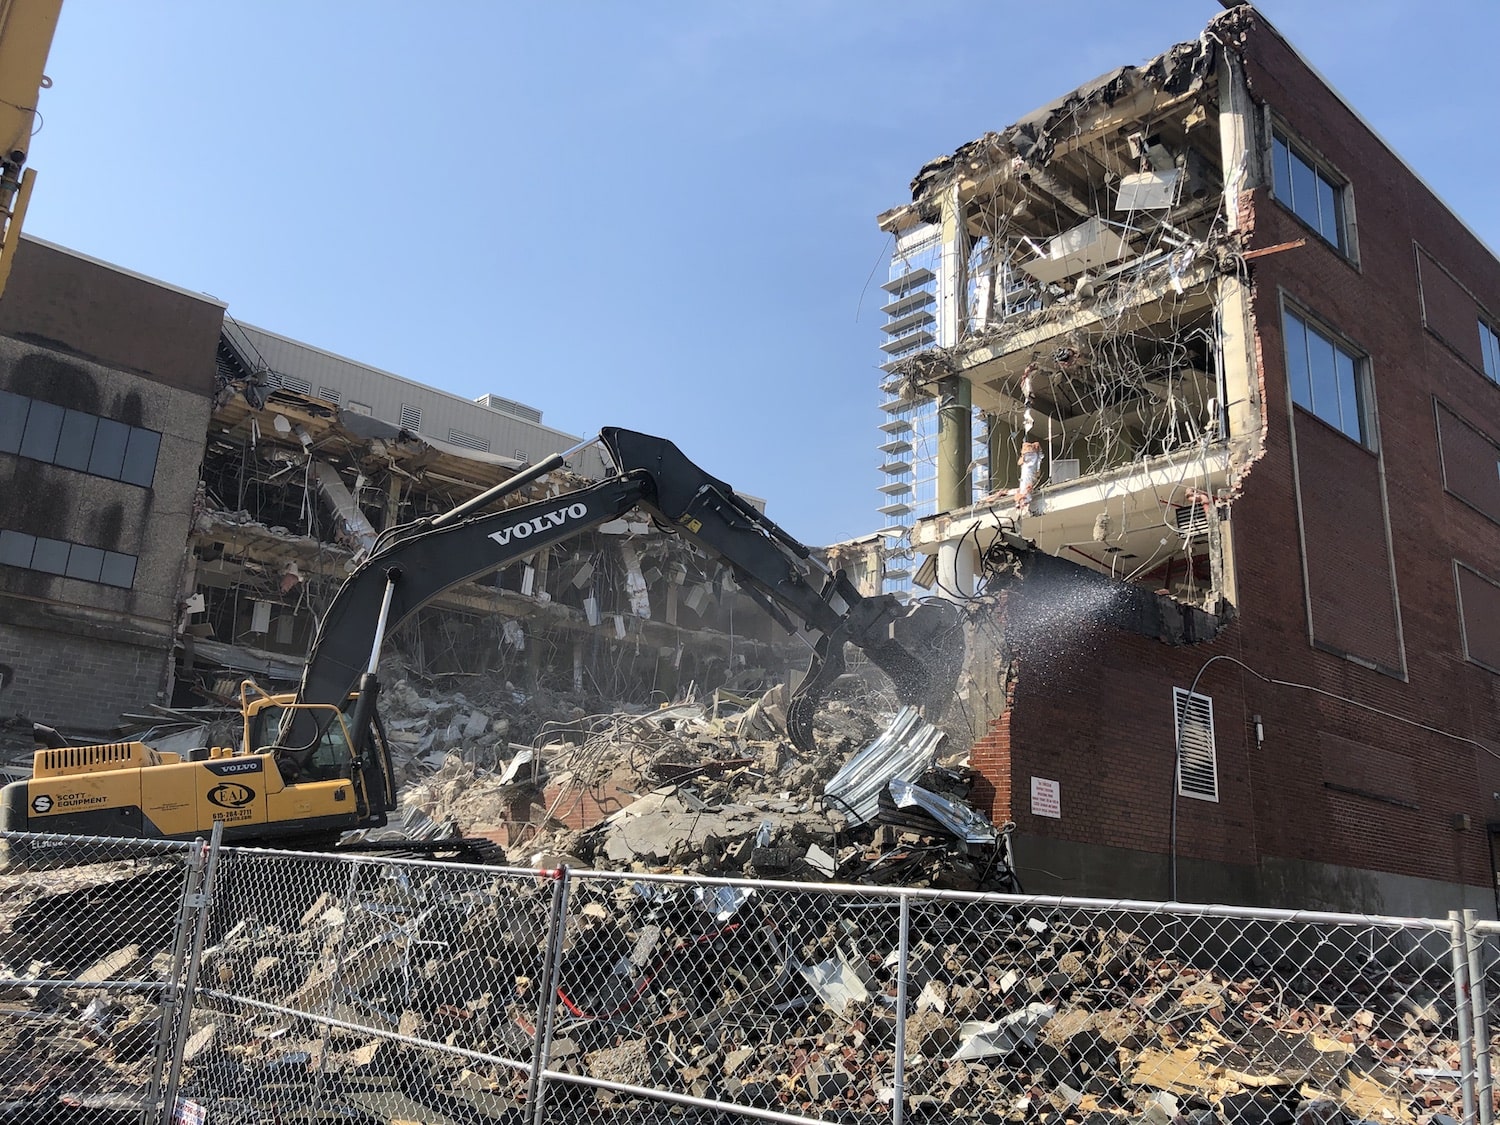 Southeast Demolition and Environmental Services